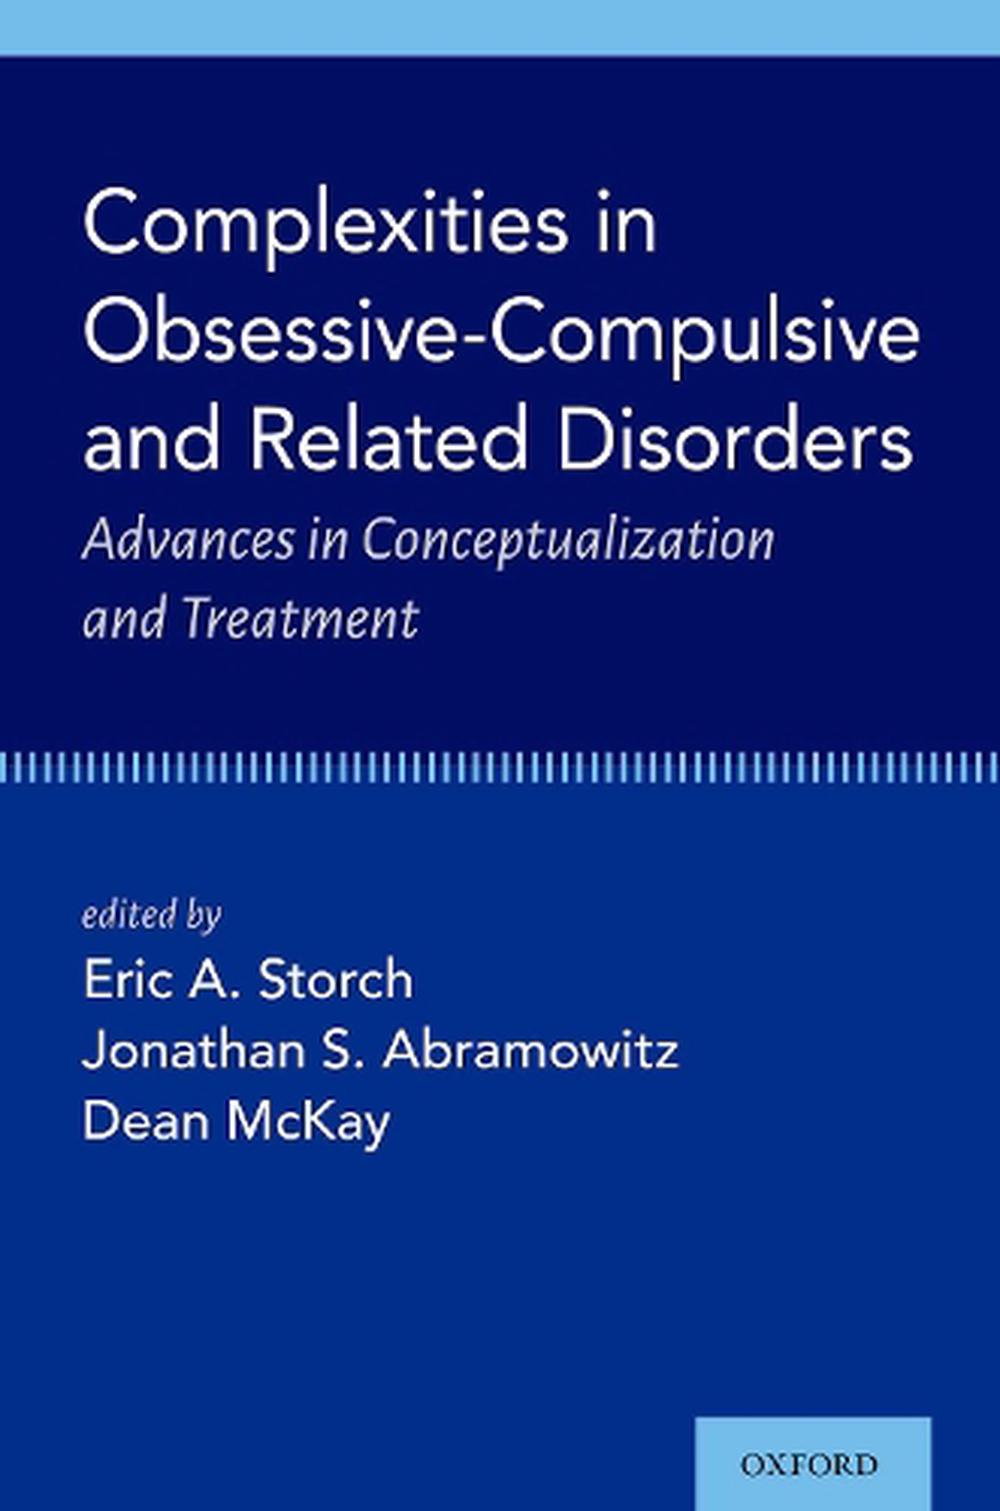 case study for obsessive compulsive and related disorders katherine